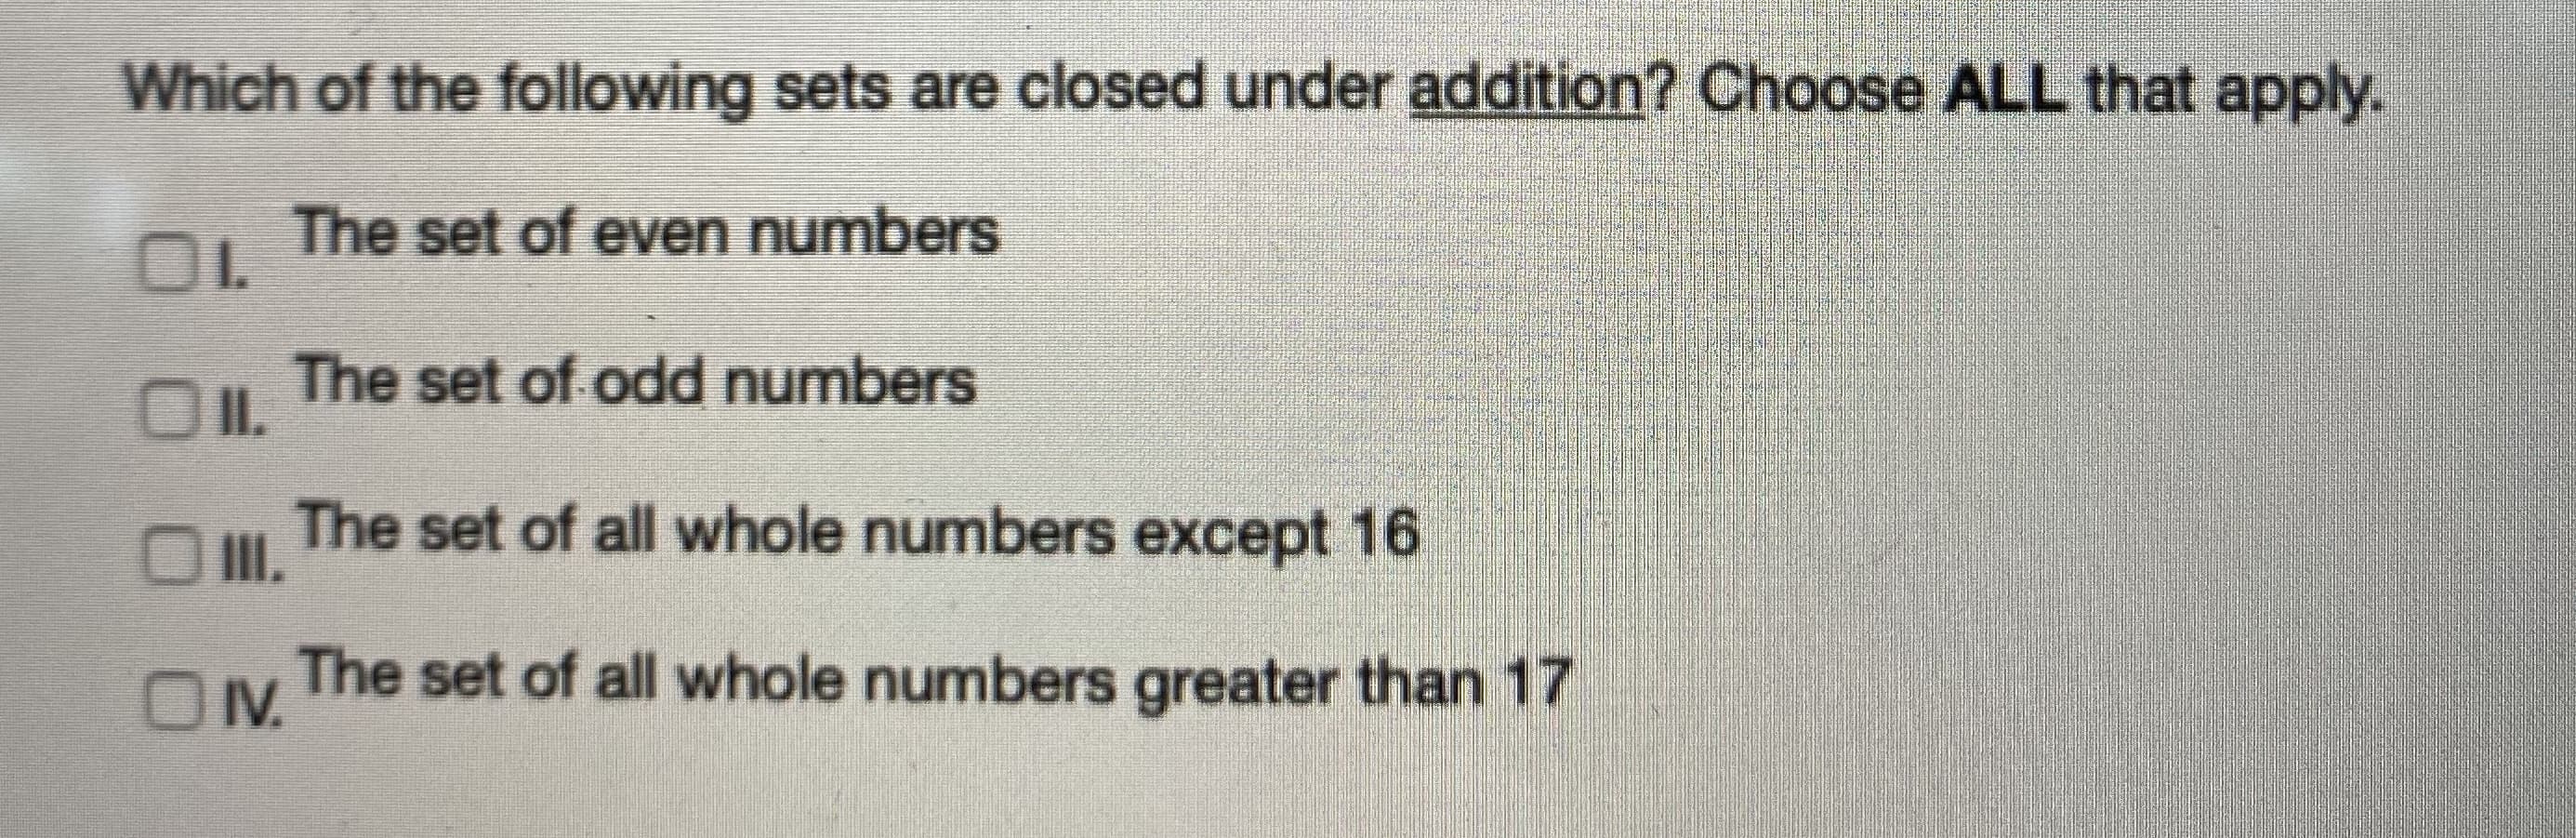 Which of the following sets are closed under addition? Choose ALL that apply.
